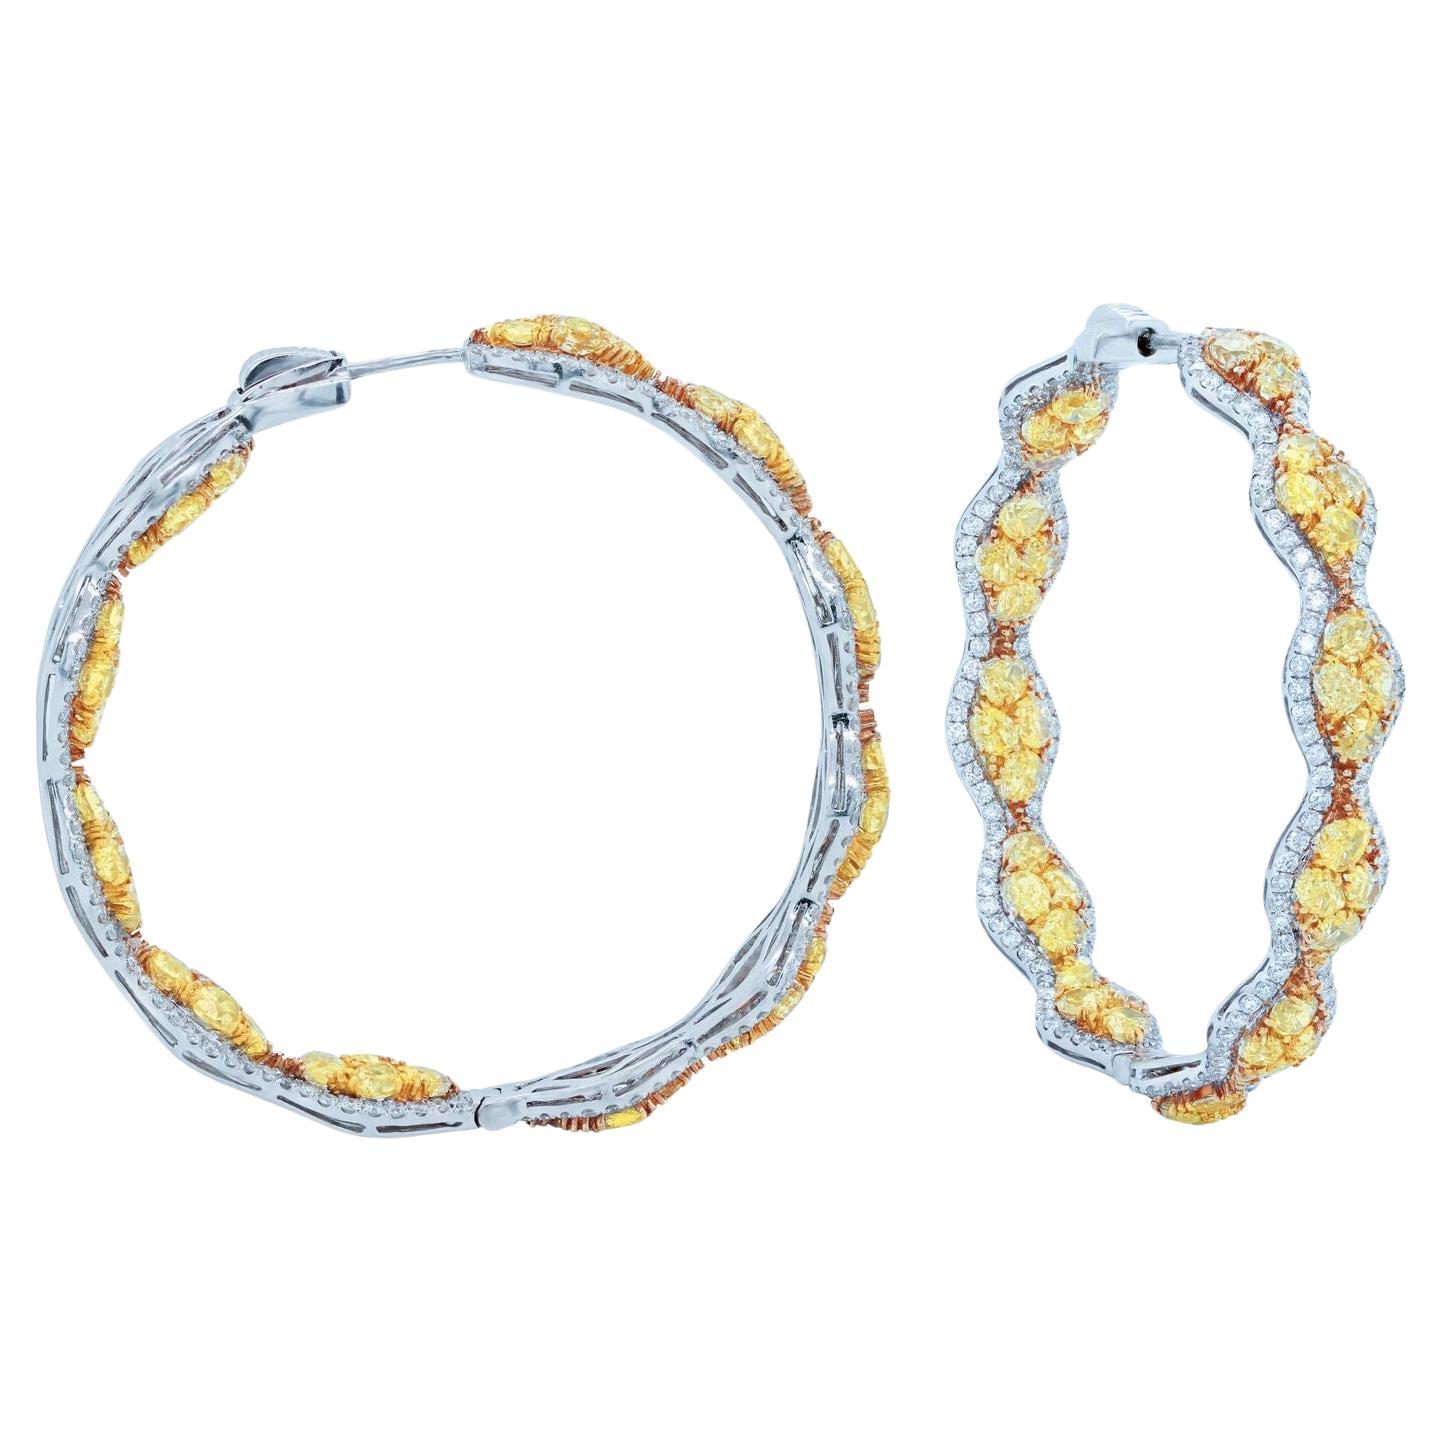 Diana M. 18 kt white and yellow gold inside-out hoop earrings 